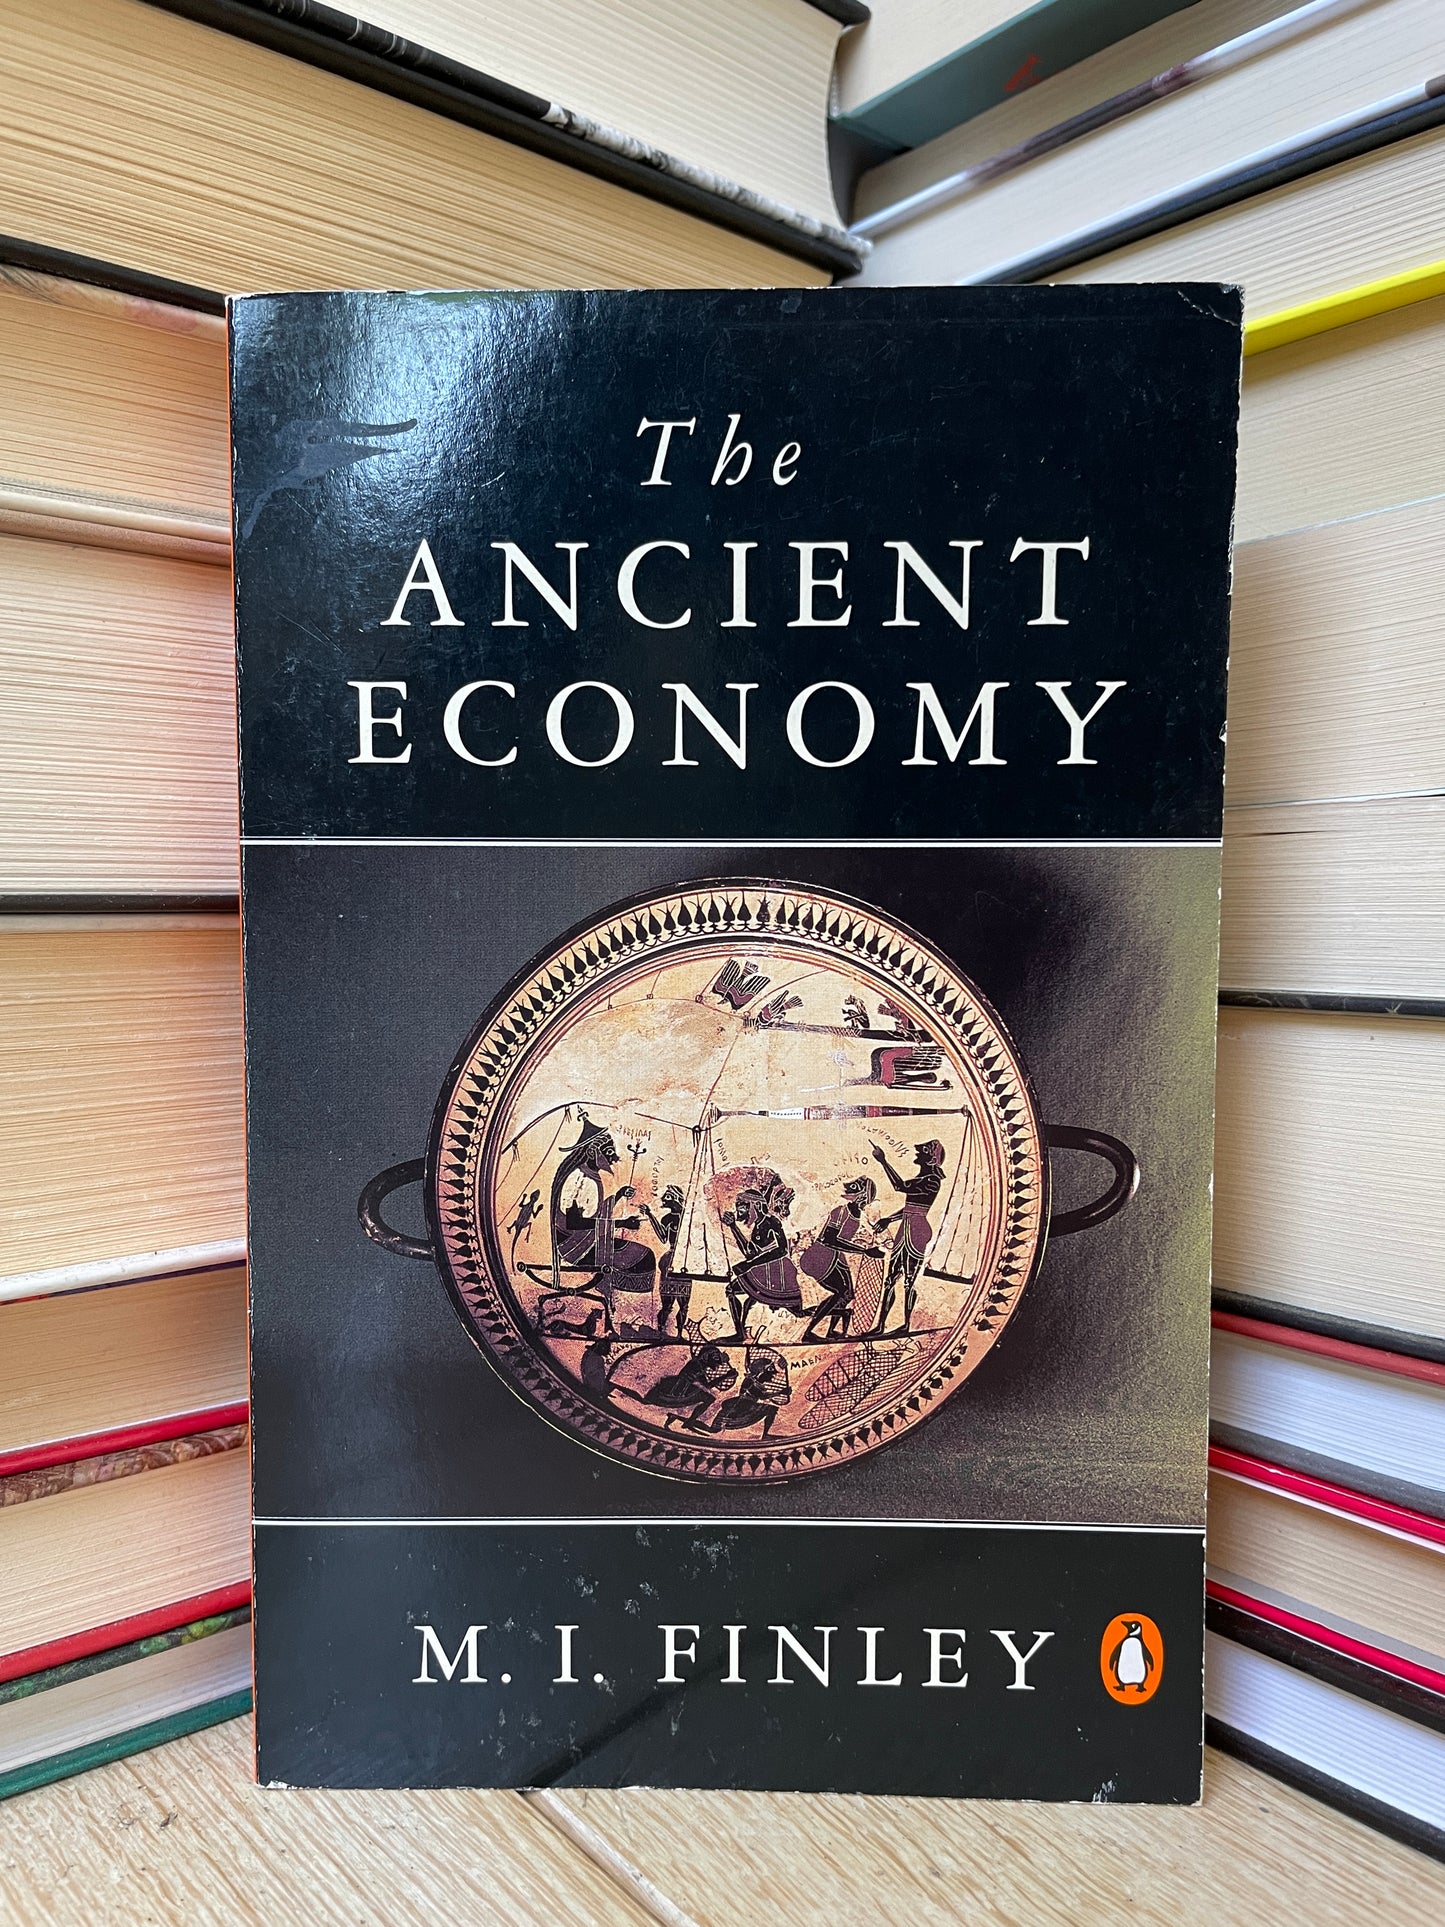 M. I. Finley - The Ancient Economy